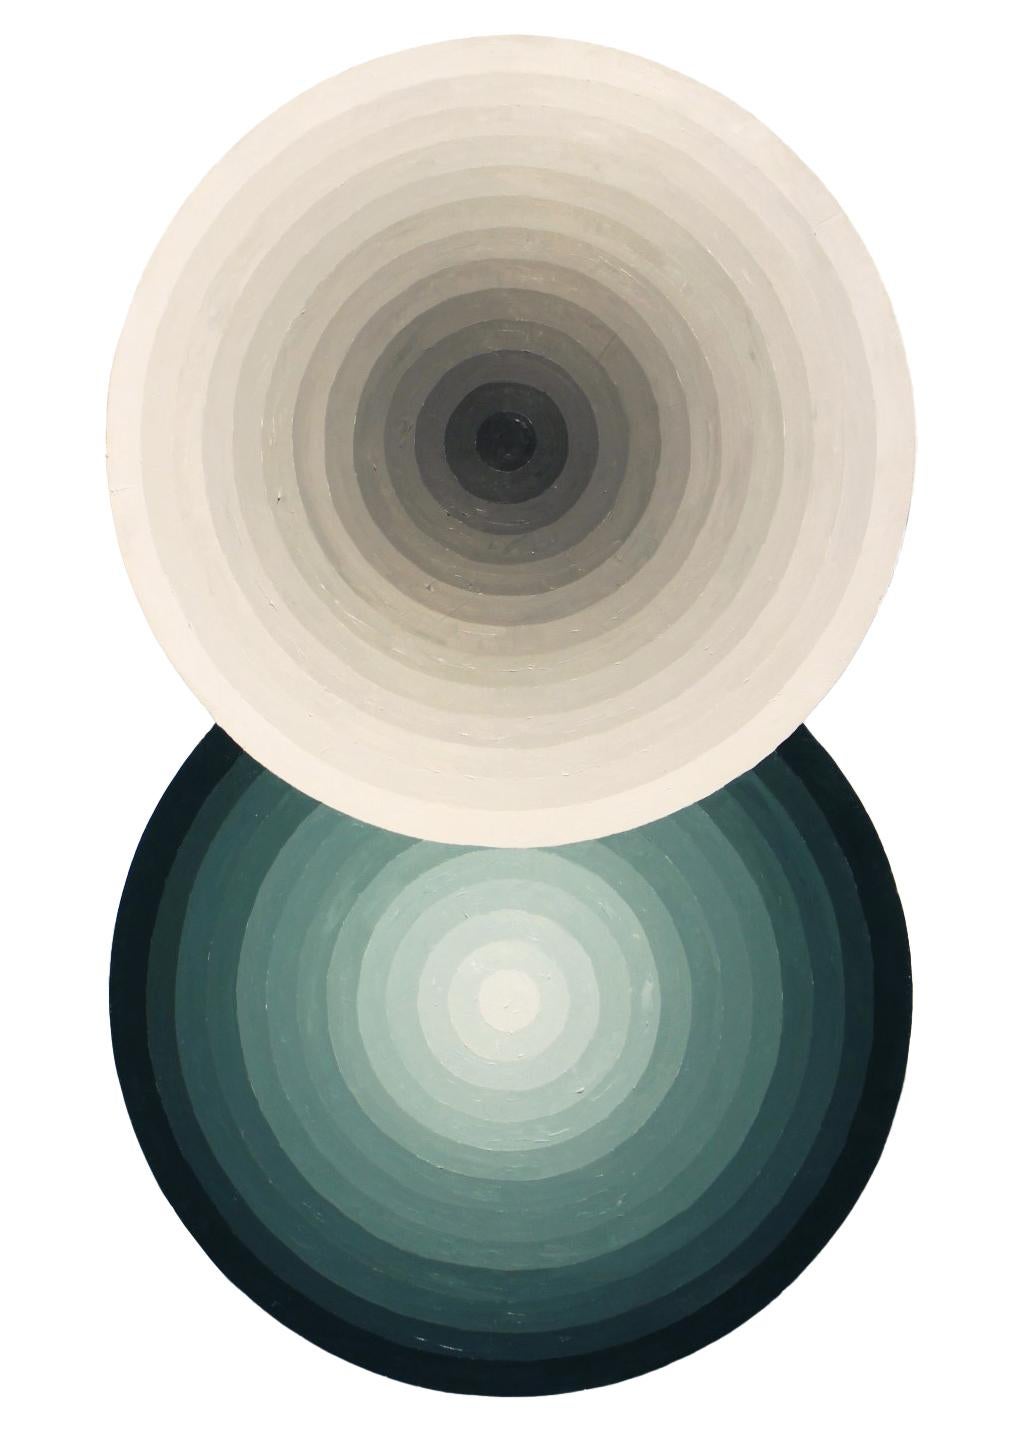 David Hardaker Abstract Painting - "End Stop" Contemporary Abstract Gray and Green Concentric Circle Painting